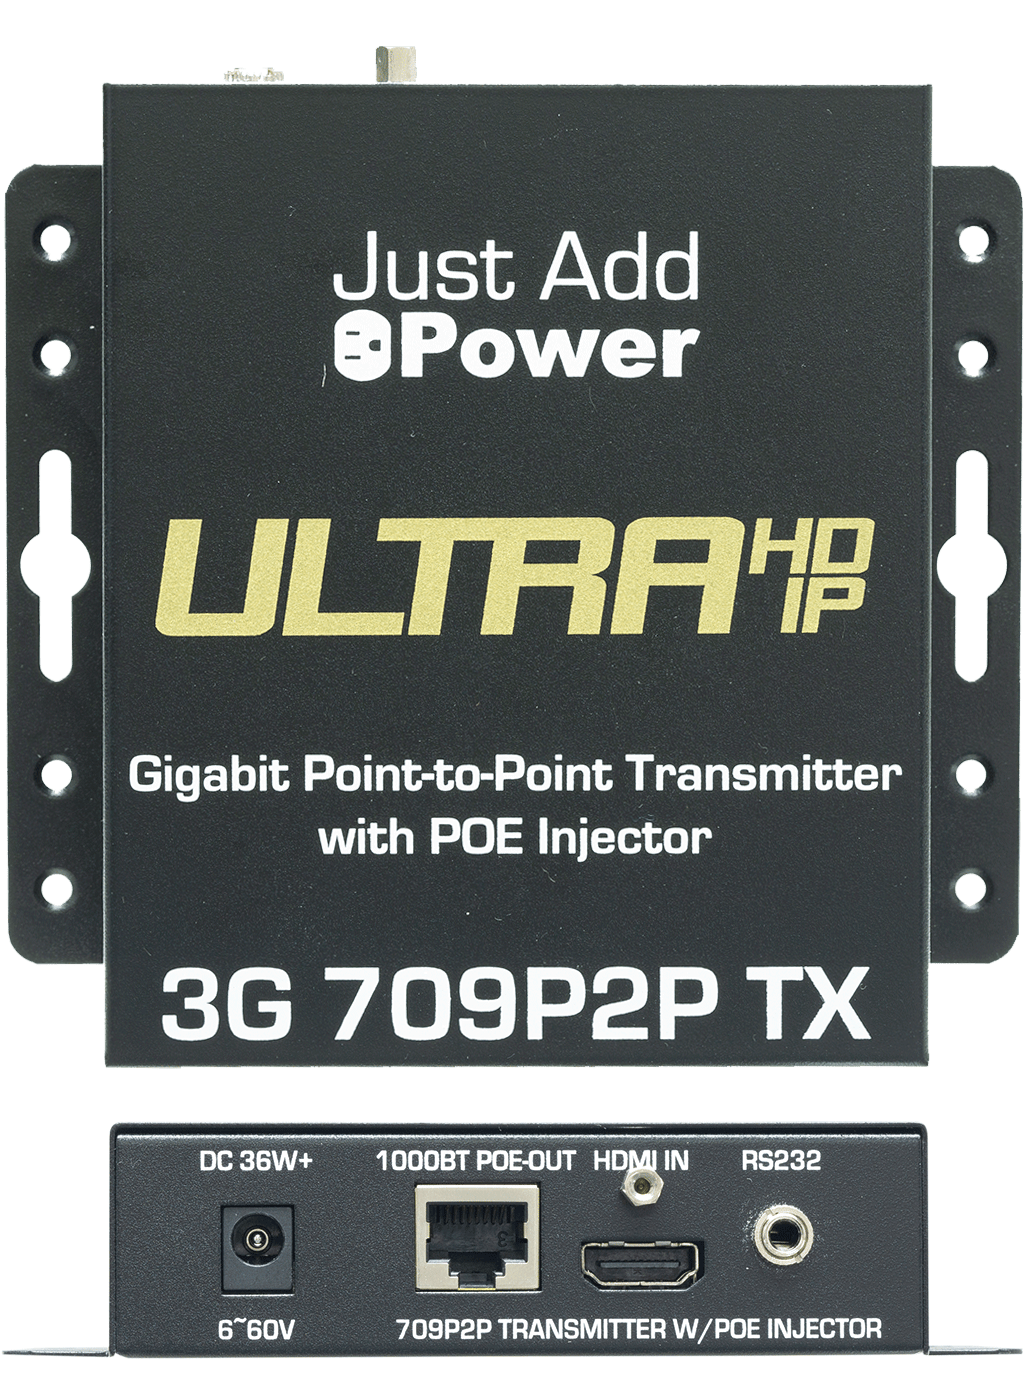 Main view of the Just Add Power VBS-HDIP-709P2P 3G PoE